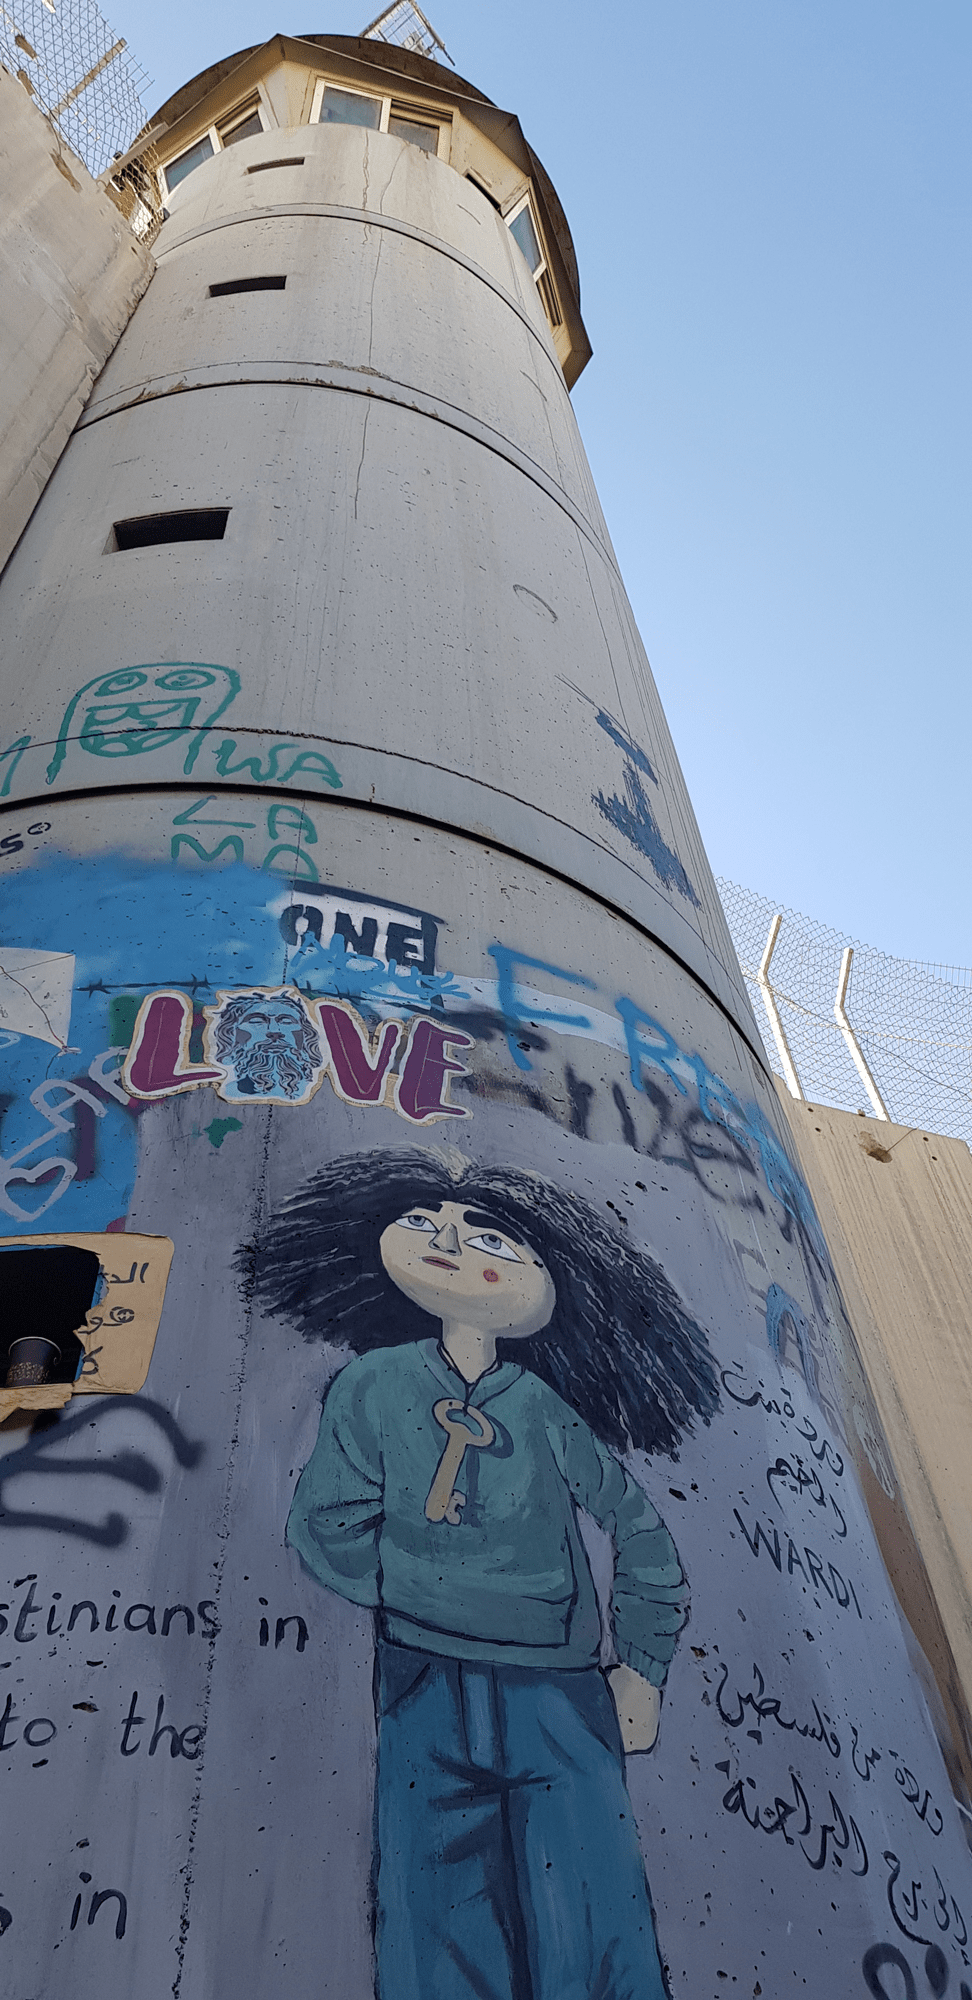 The challenge of human rights in Palestine, University of Padova, 17 May 2023. 
An Israeli control tower along the wall dividing Israel and the West Bank. On the tower is a mural of a little girl with a key around her neck looking up.